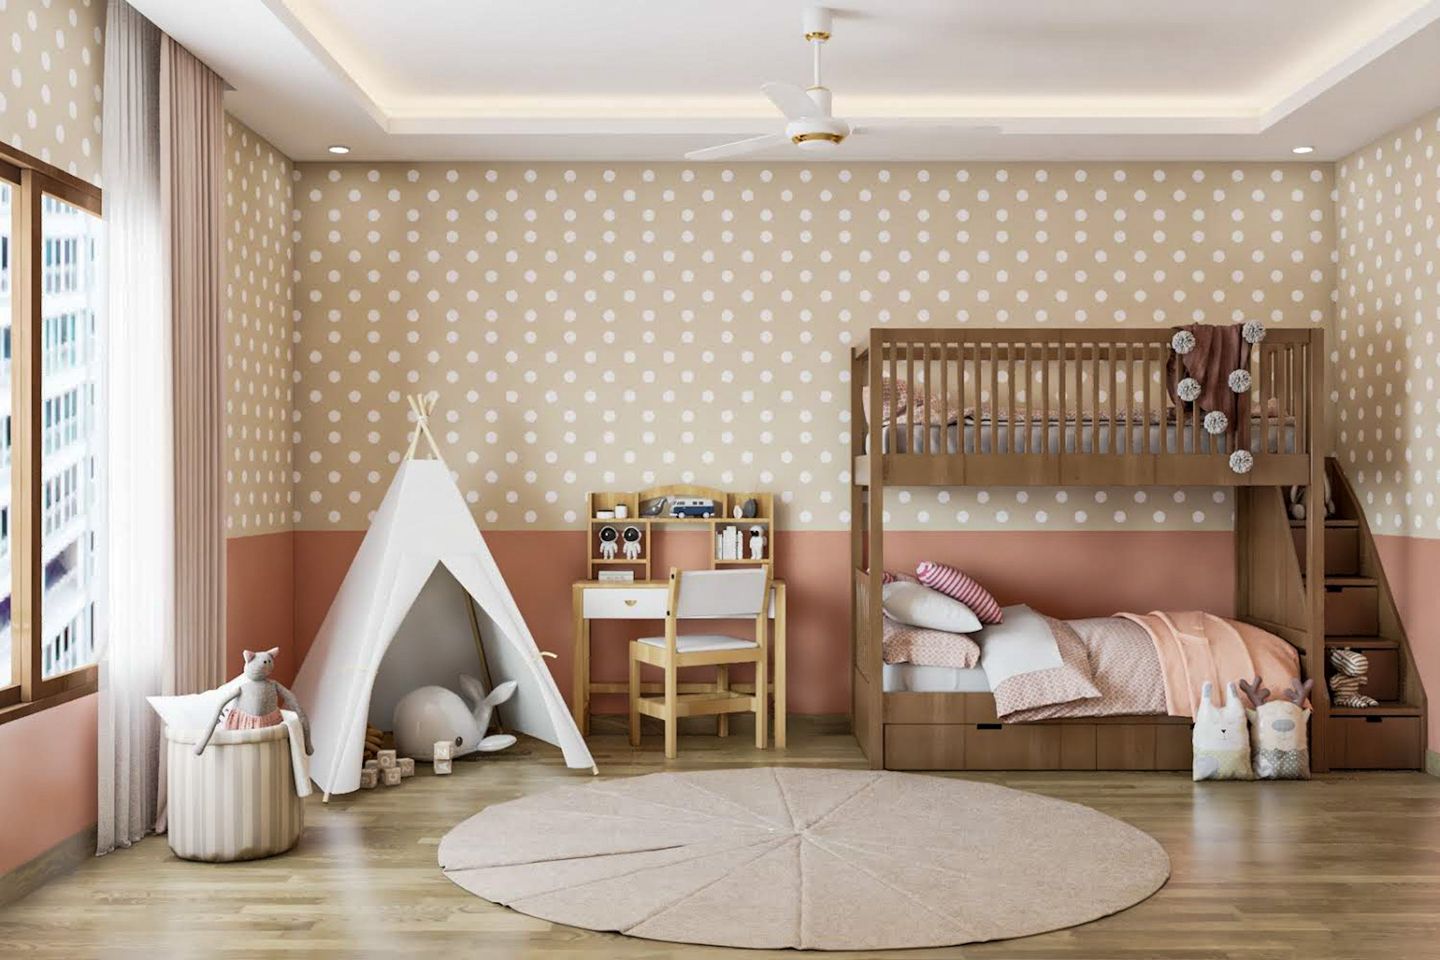 Beige And Peach Wall Paint Design For Kid's Bedrooms - Livspace